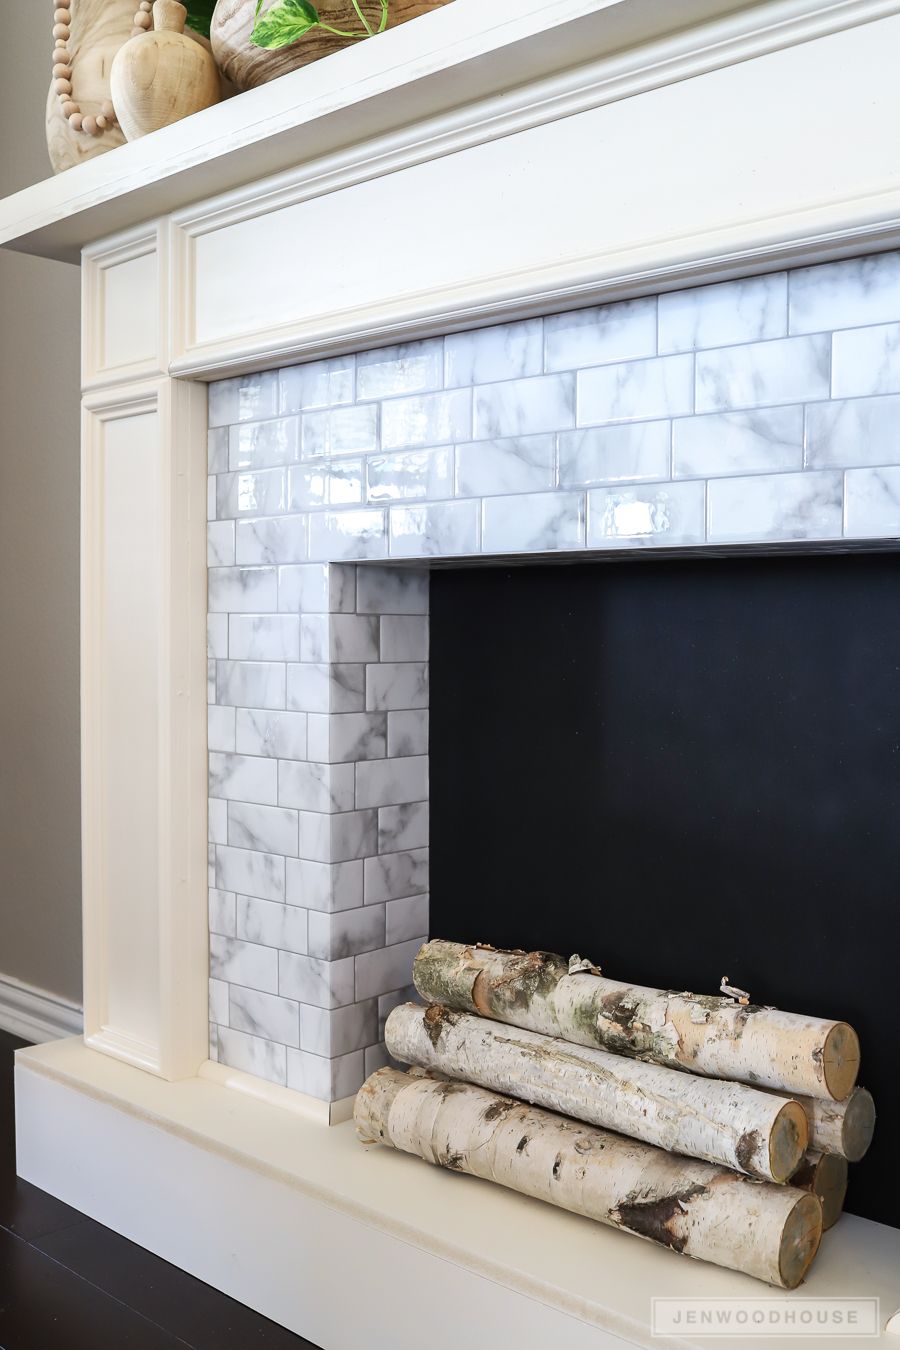 Fireplace Stick Awesome How to Make A Diy Faux Fireplace Featuring Smart Tiles